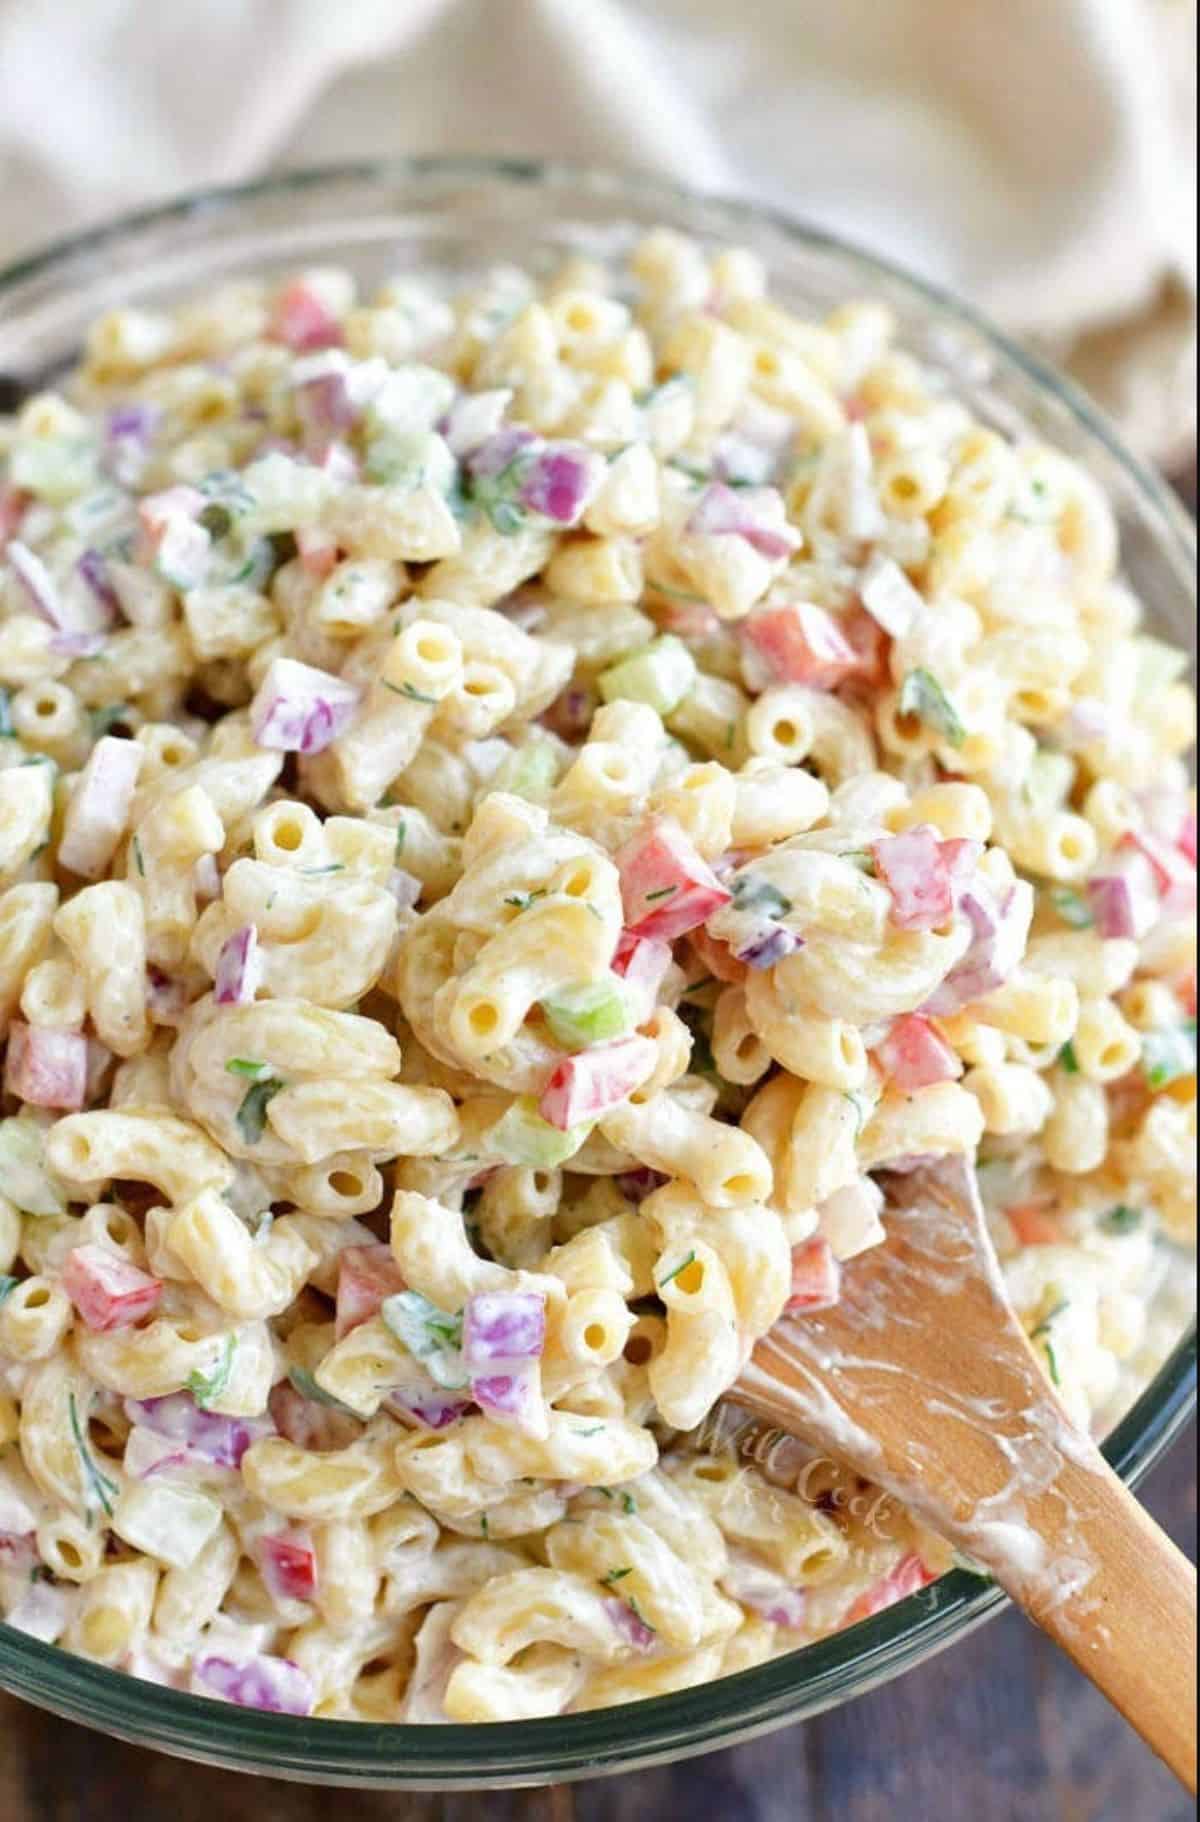 using a wooden serving spoon to scoop out some macaroni salad from a bowl.